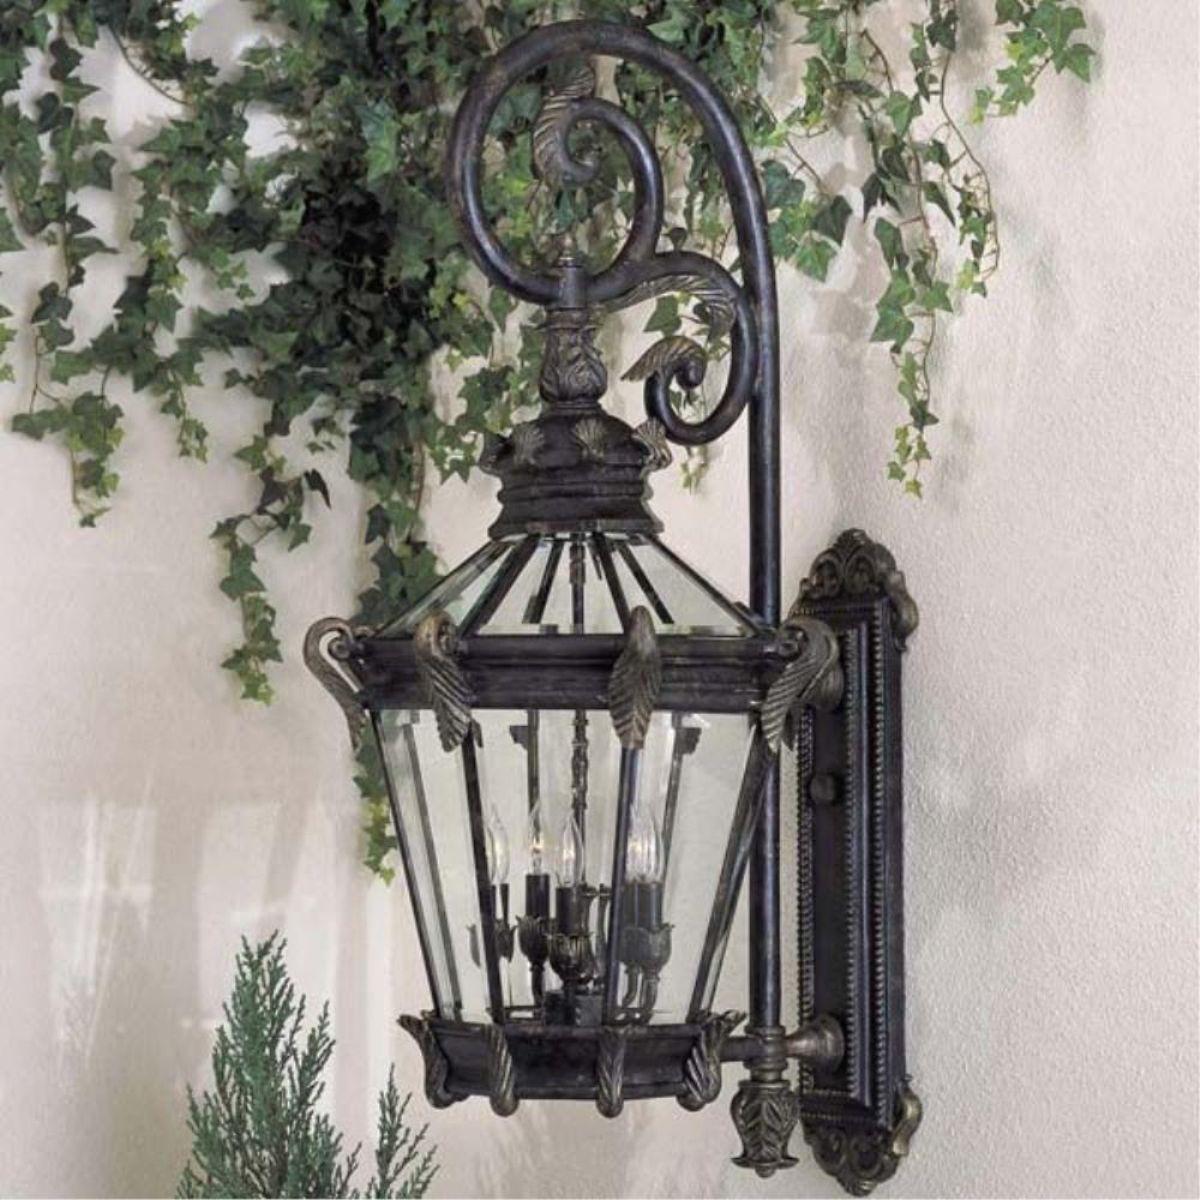 Stratford Hall 40 in. 5 Lights Outdoor Wall Lantern Heritage & Gold Finish